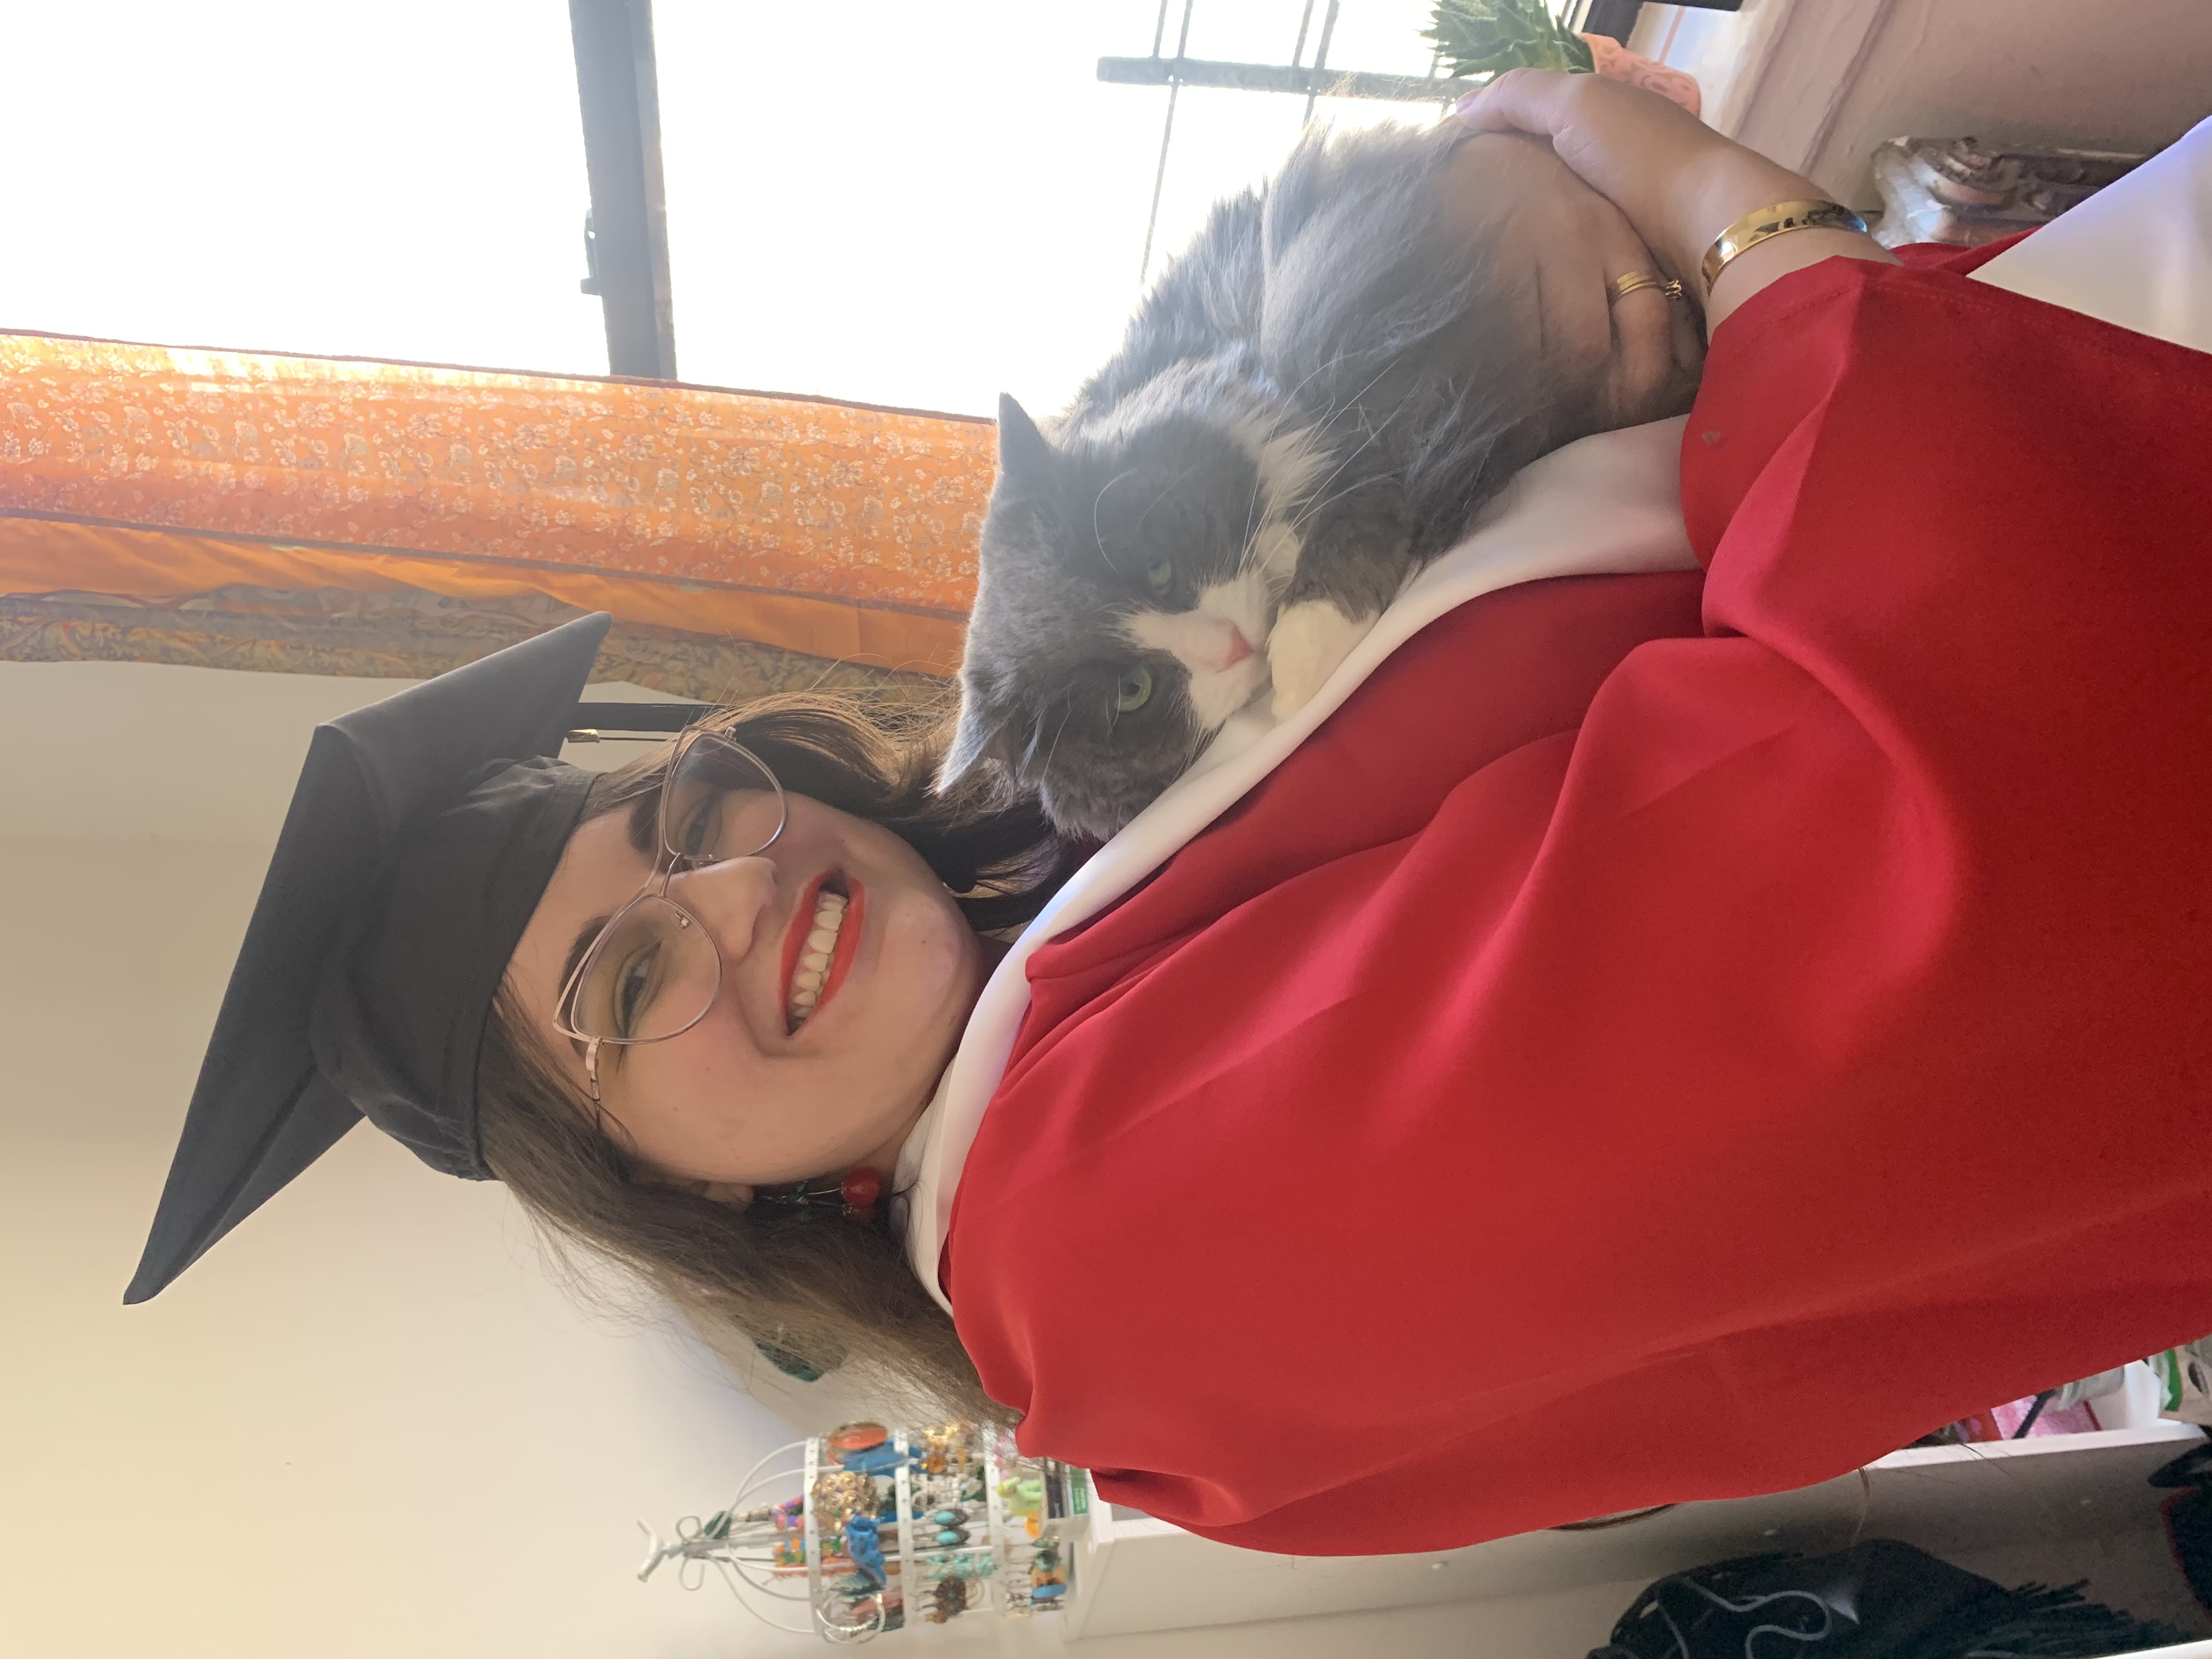 A white woman with long brown hair and cateye glasses wearing a red graduation robe and a black cap holding a long-haired gray-and-white cat with mint green eyes.